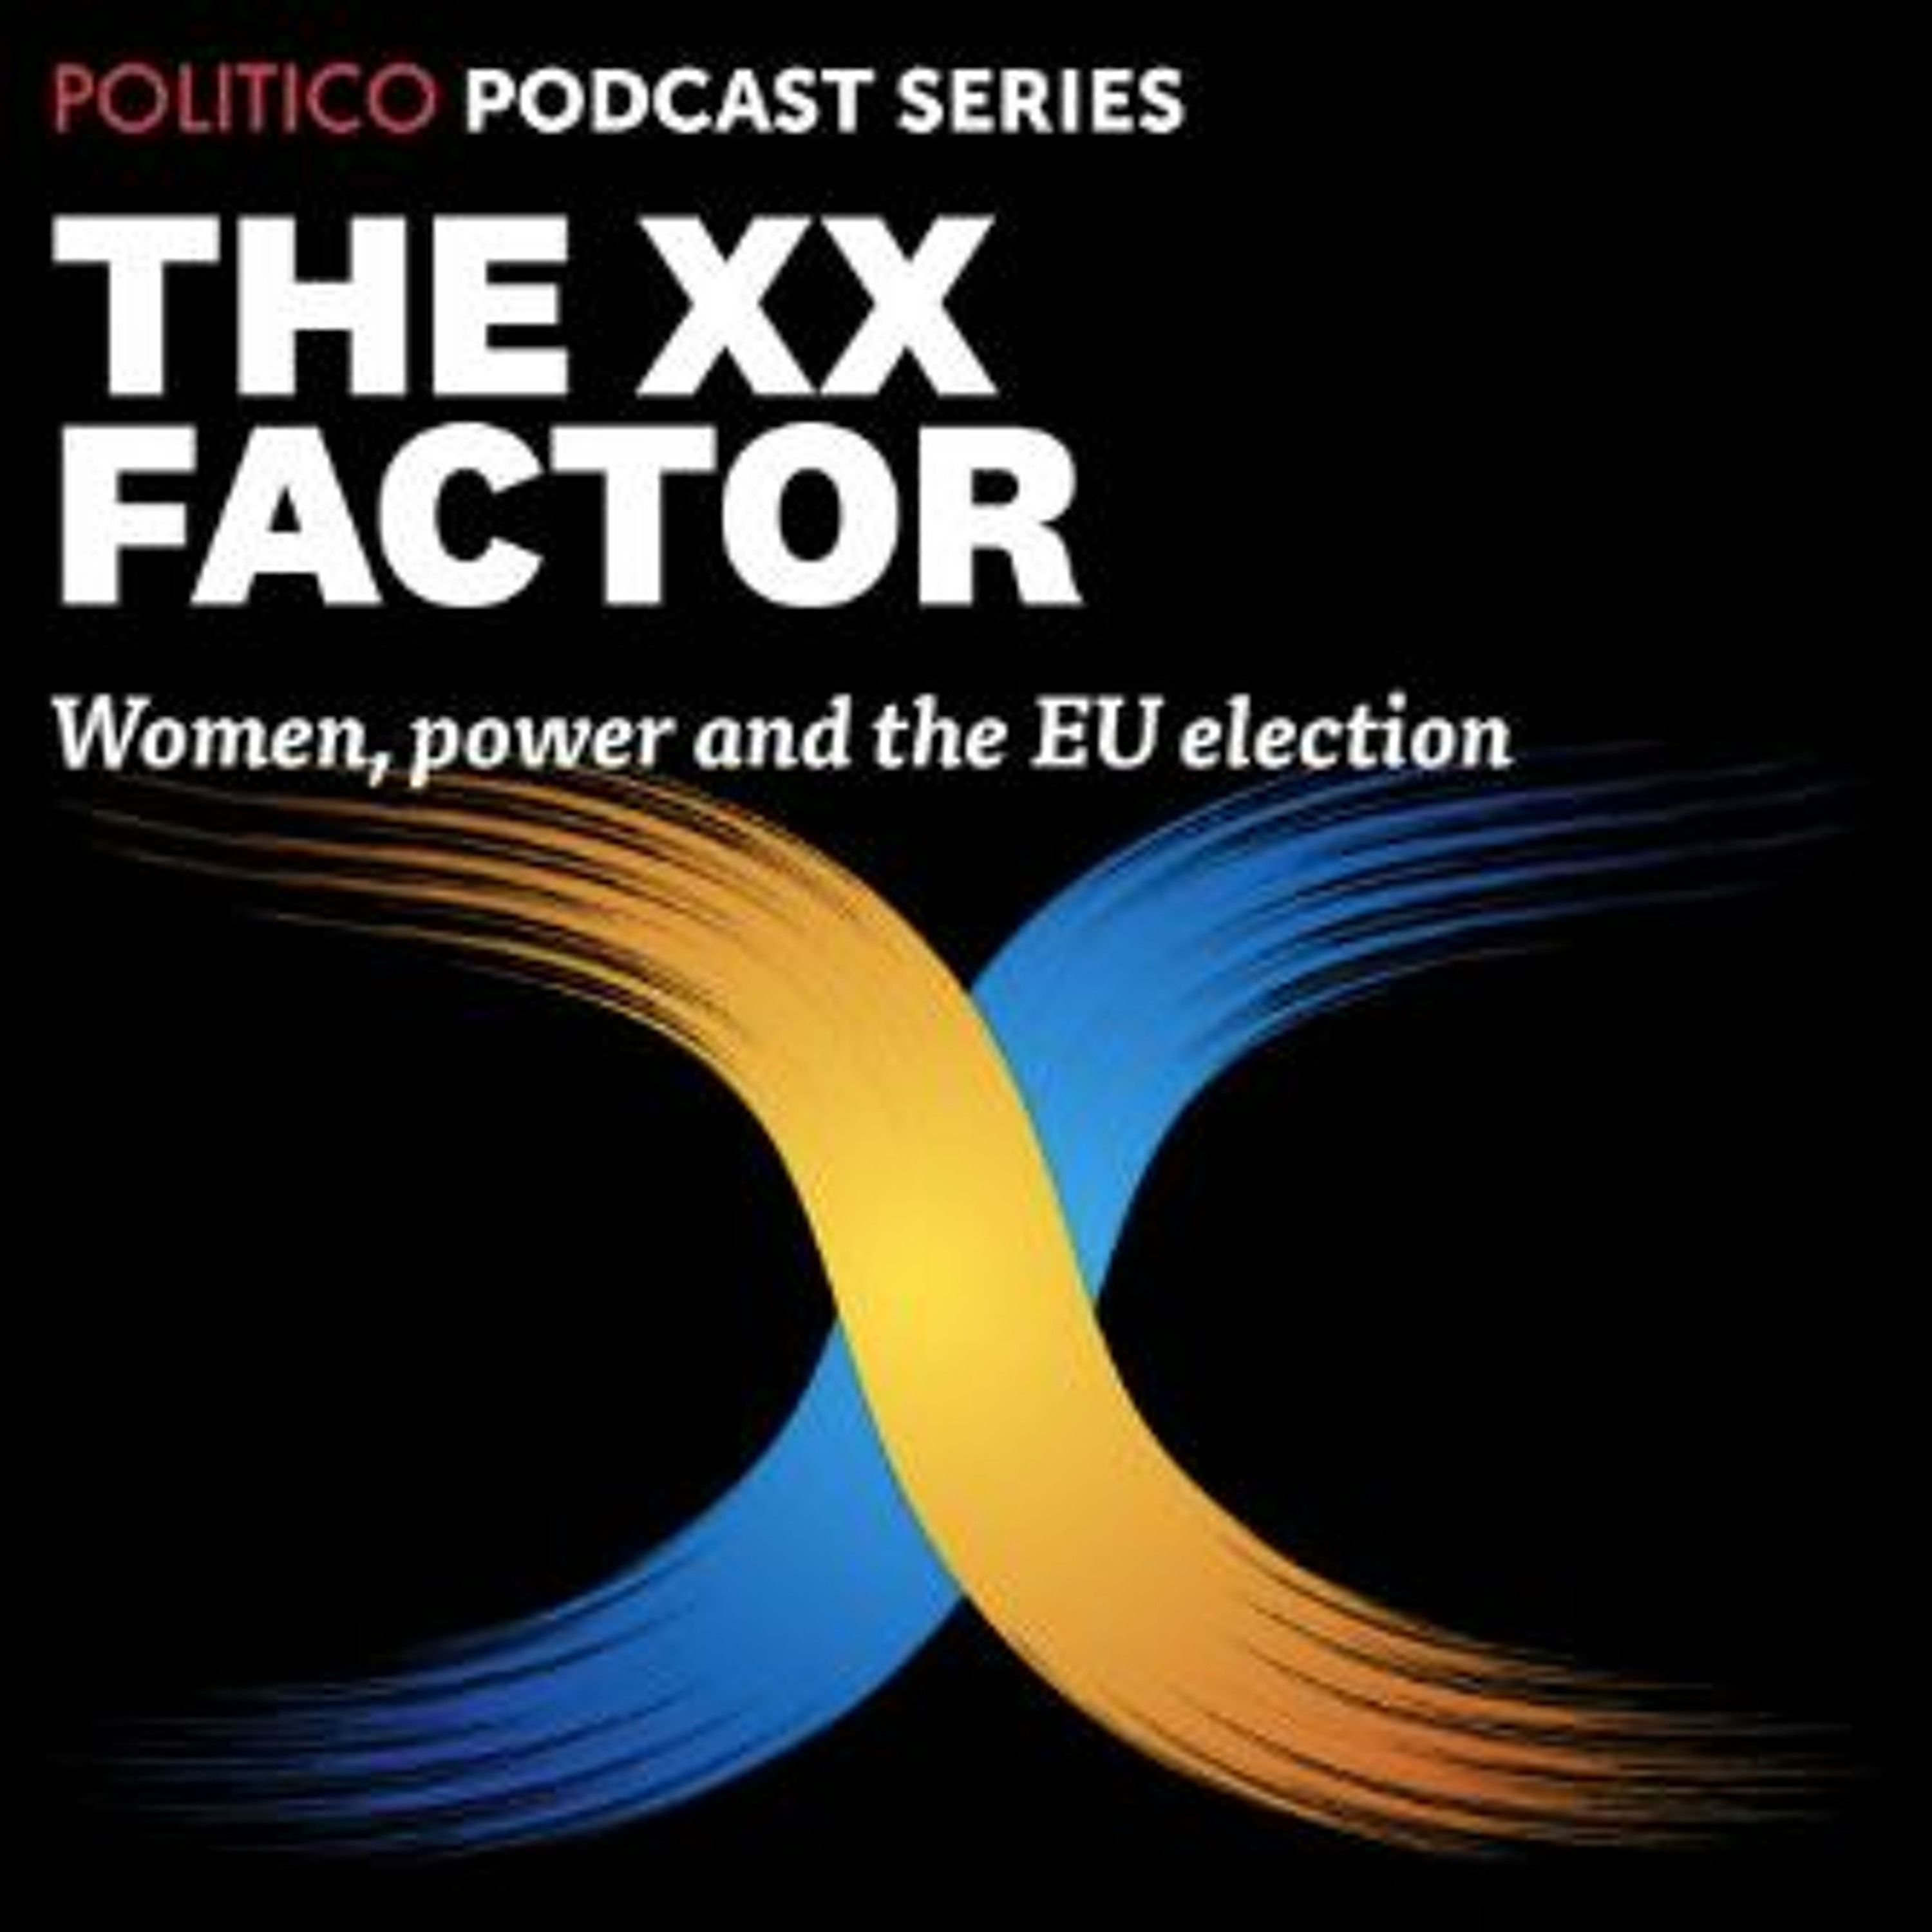 XX Factor Episode 5 — UK: Annunziata Rees-Mogg, and MPs Mary Creagh, Jo Swinson, and Helen Whately